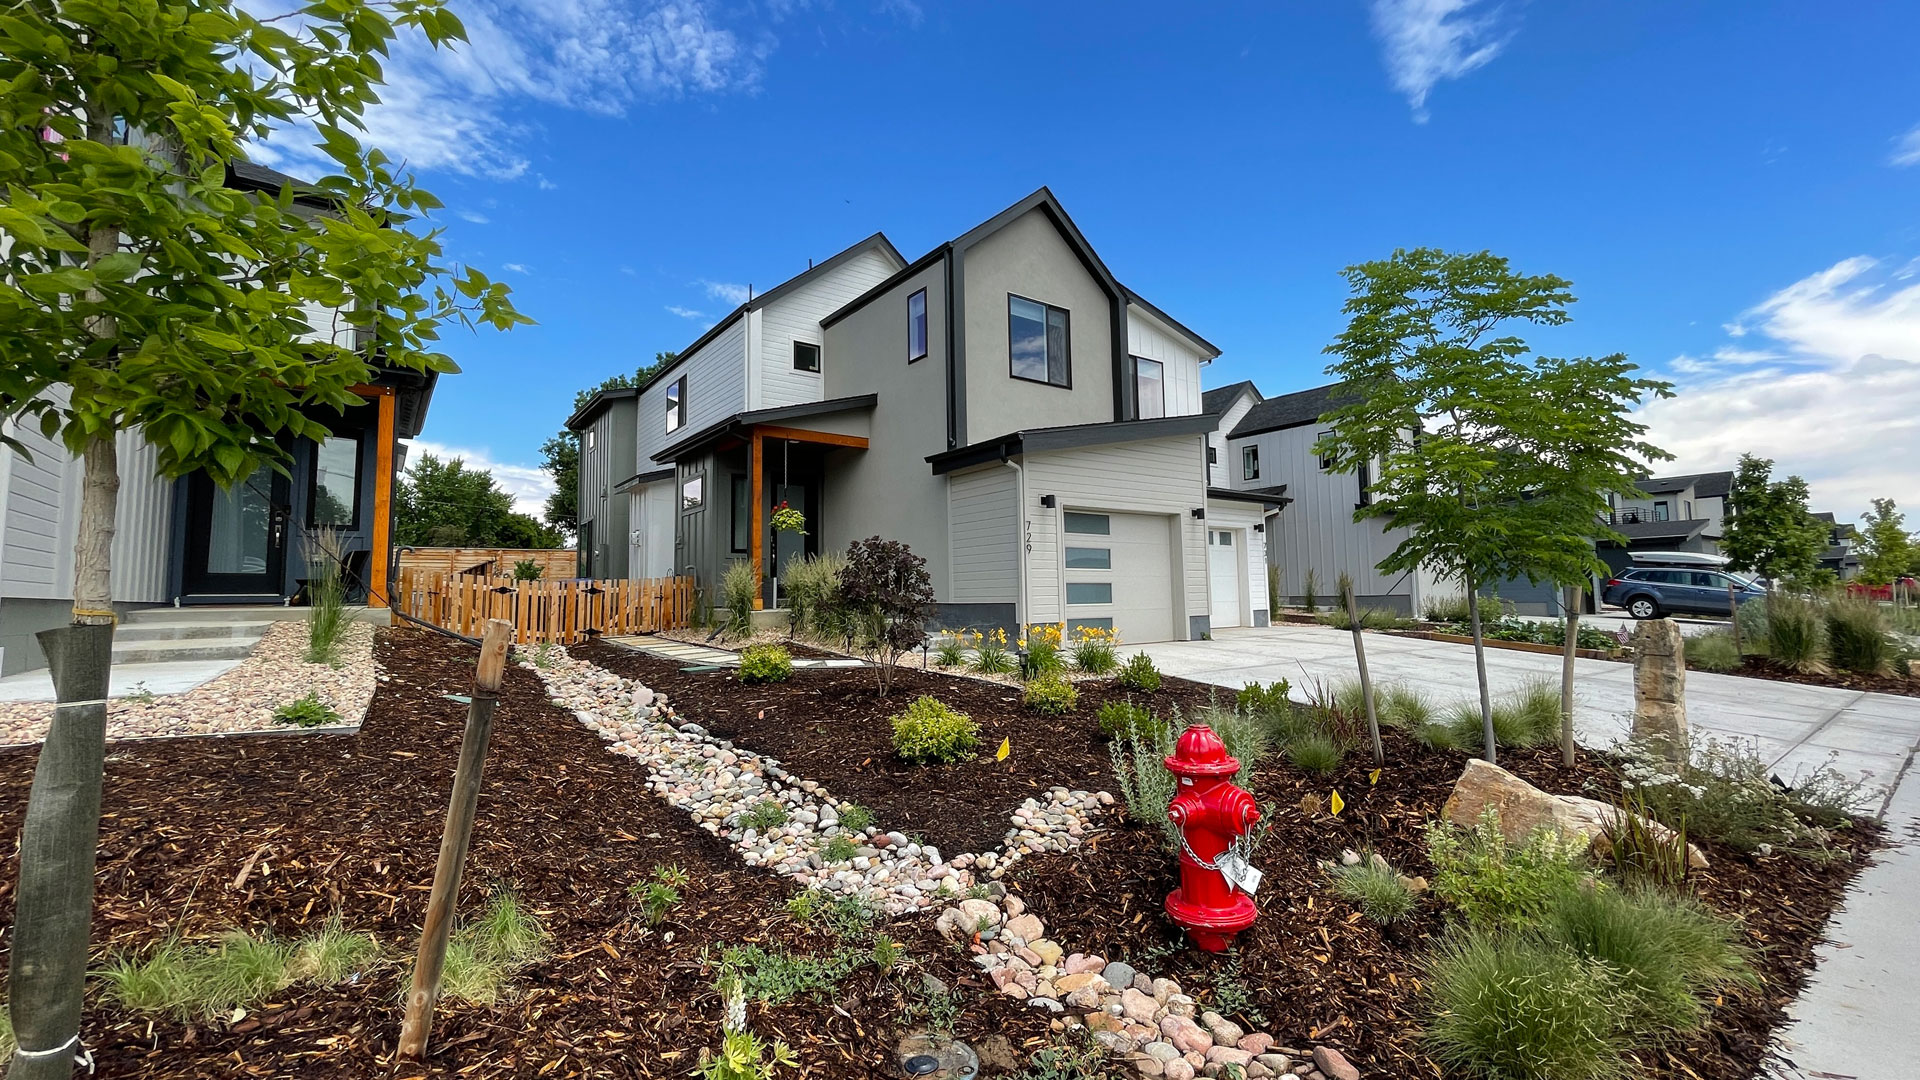 Featured image for “Diverge Homes Completes Sale and Absorption of Initial 30 Cannon Trail Homes With a 23% Closing Price Increase Between First and Last Phase”